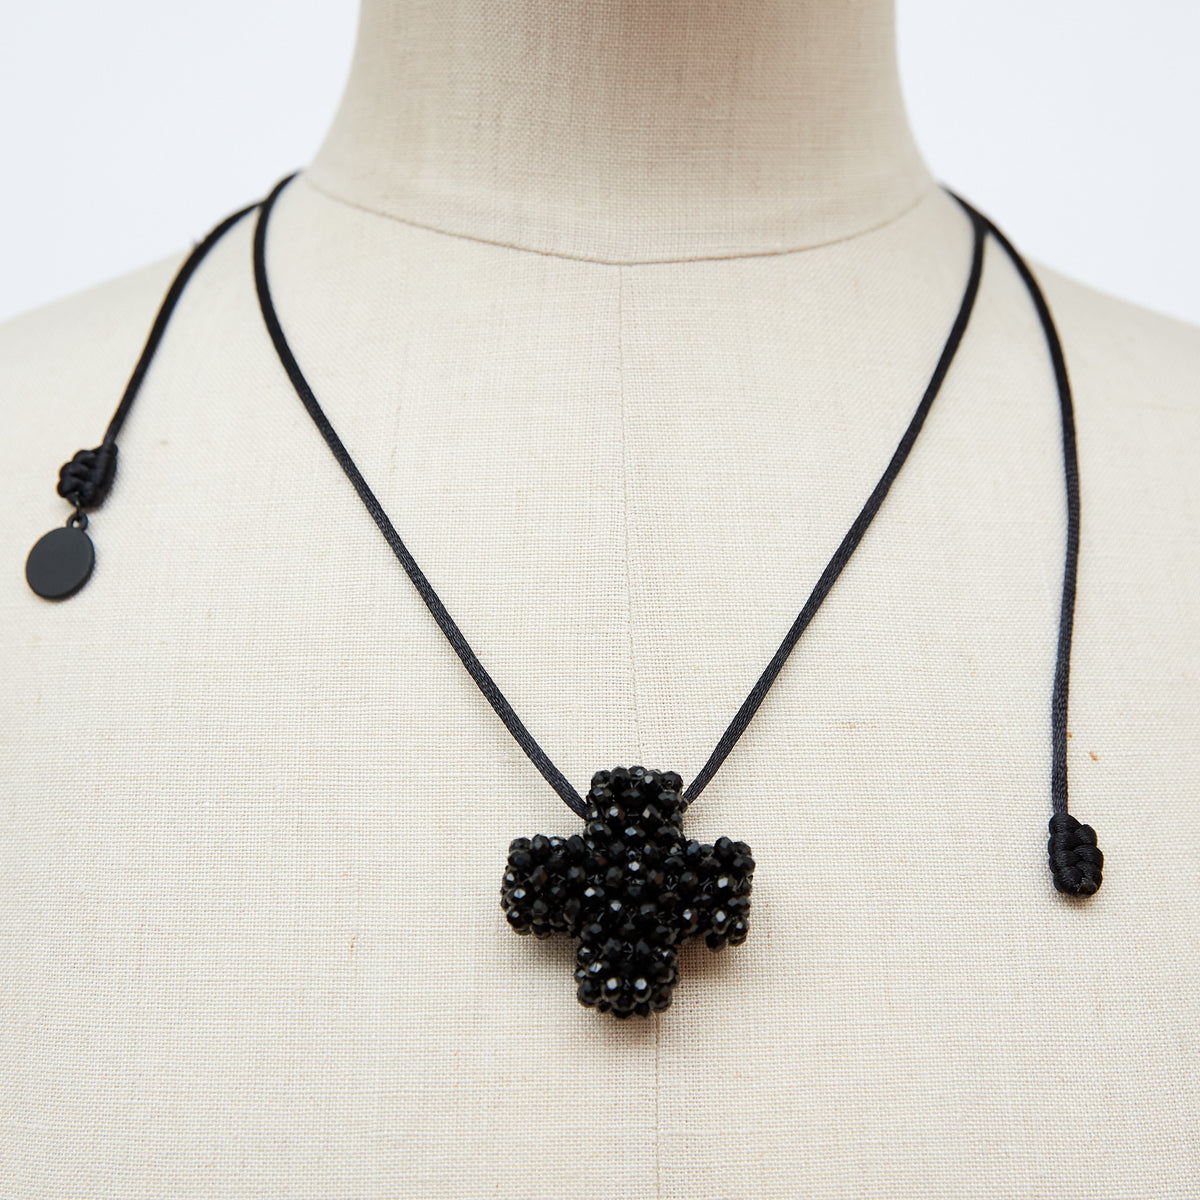 1518 - Necklace in Black